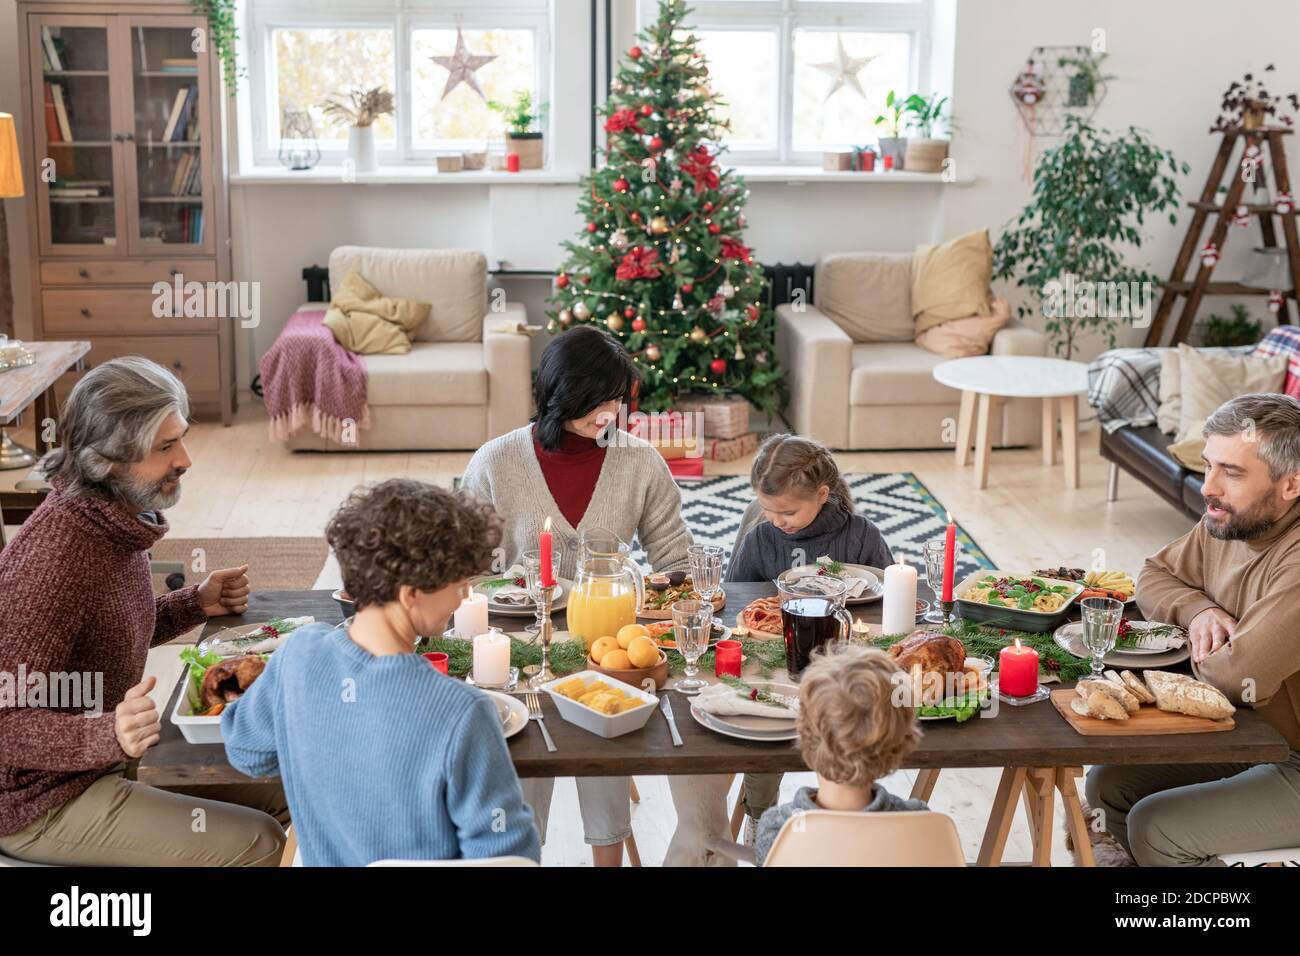 Large family consisting of three generations dining by served festive table Stock Photo